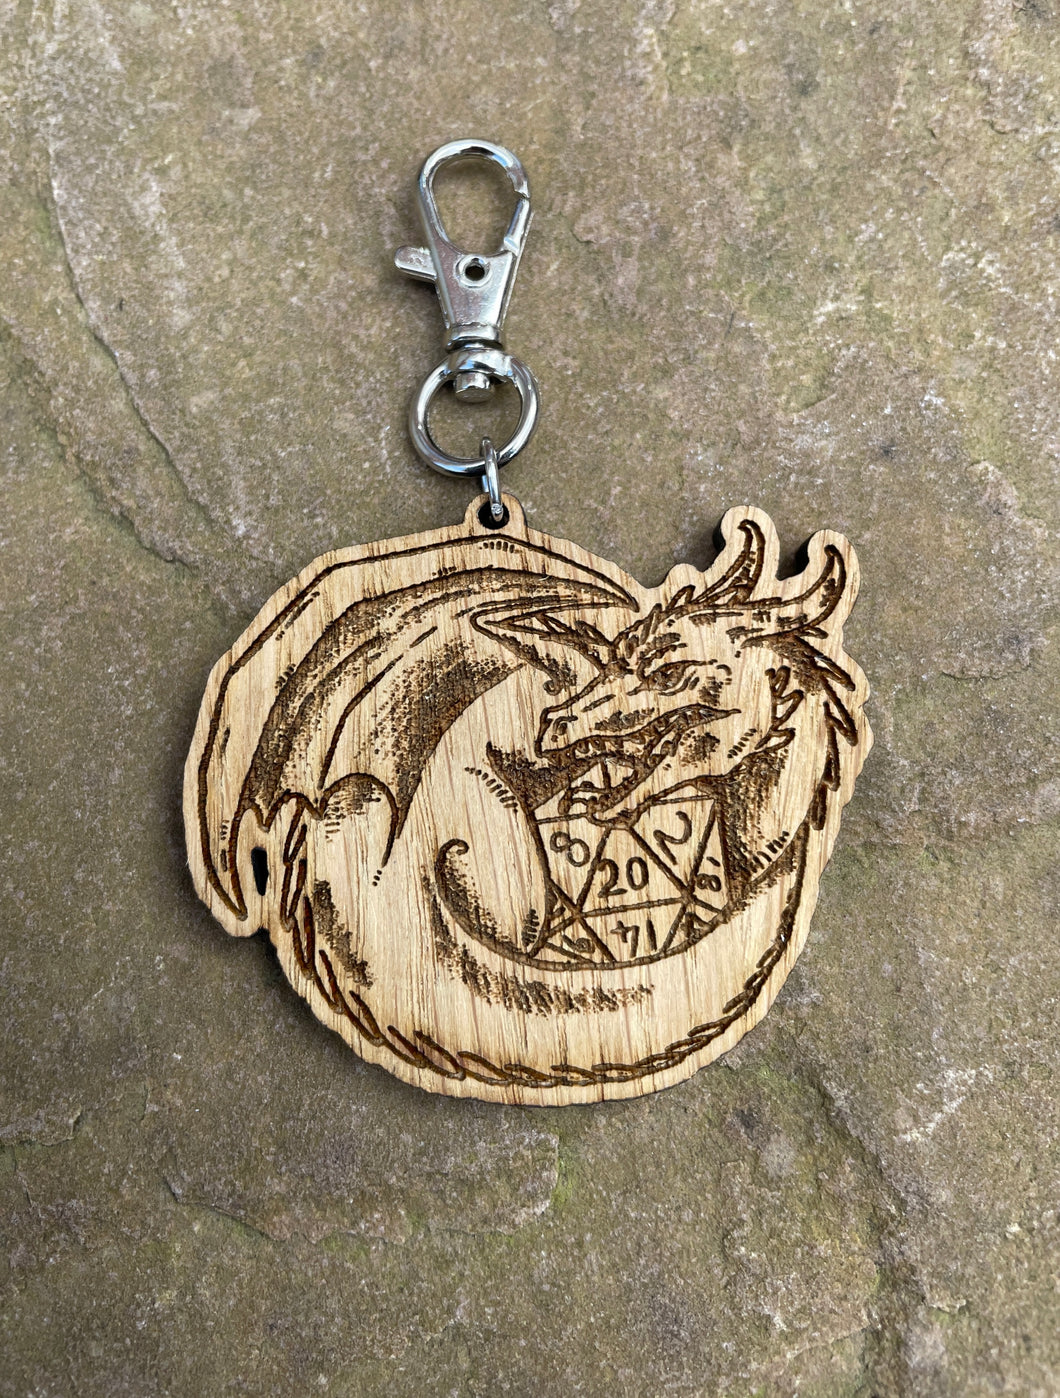 Dice Guardian Engraved Wooden Charm